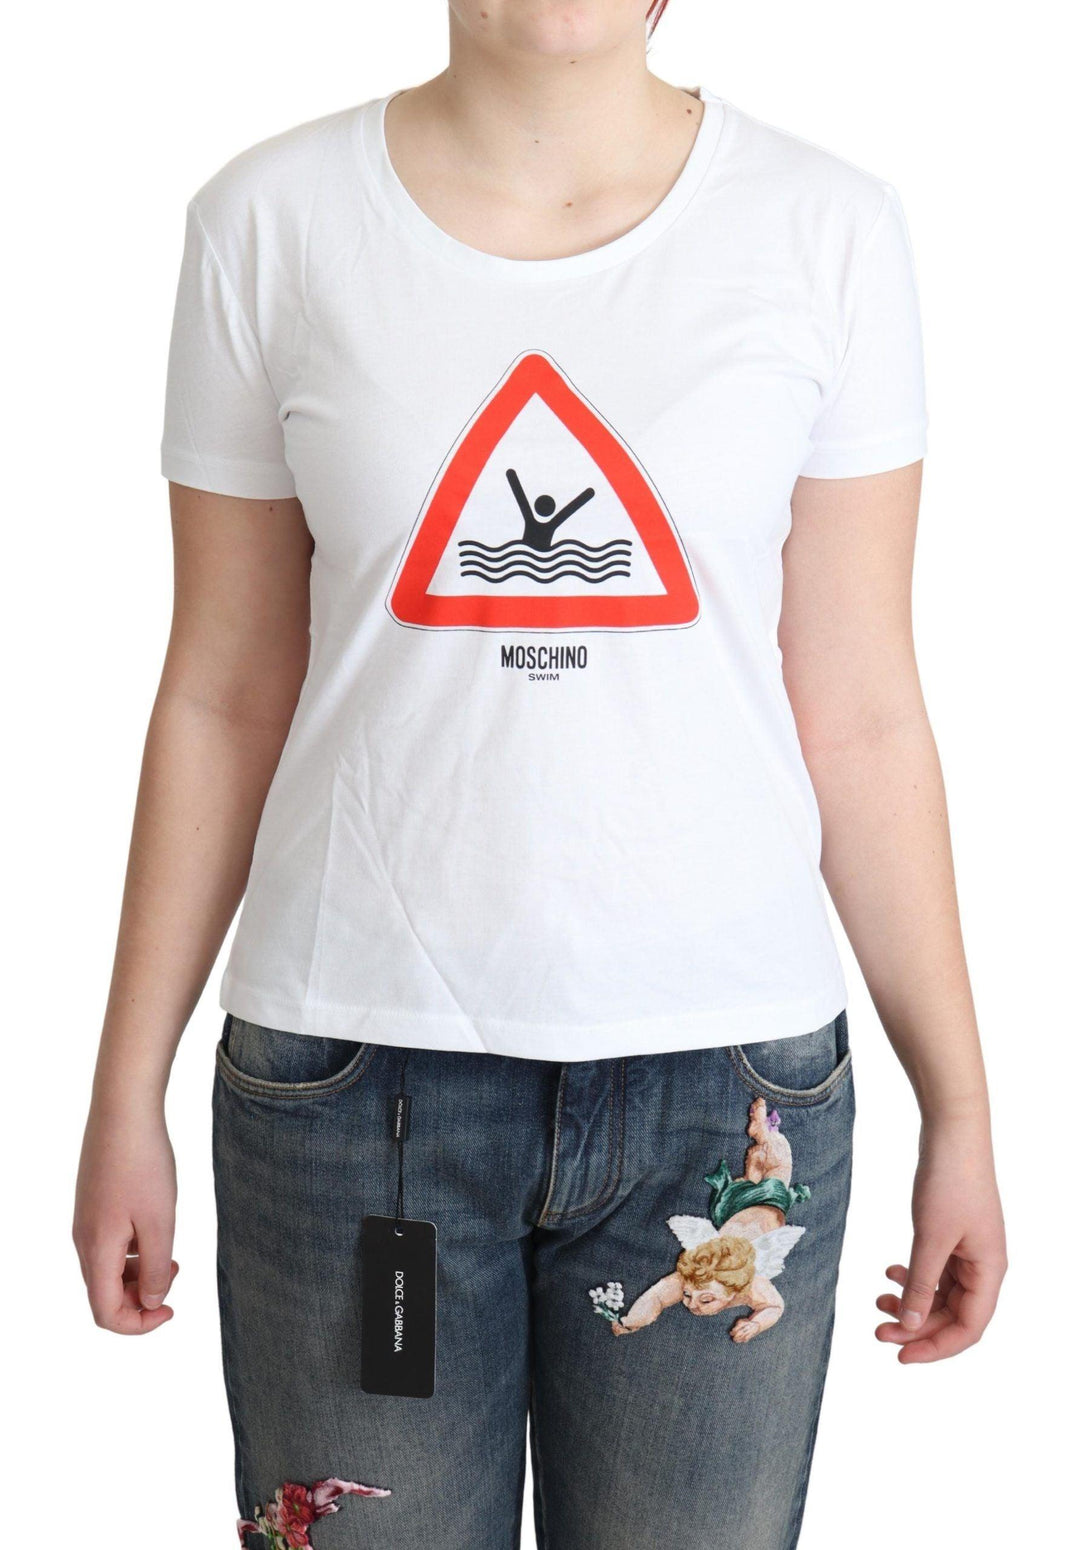 Moschino White Cotton Graphic Triangle Print T-shirt - Ellie Belle